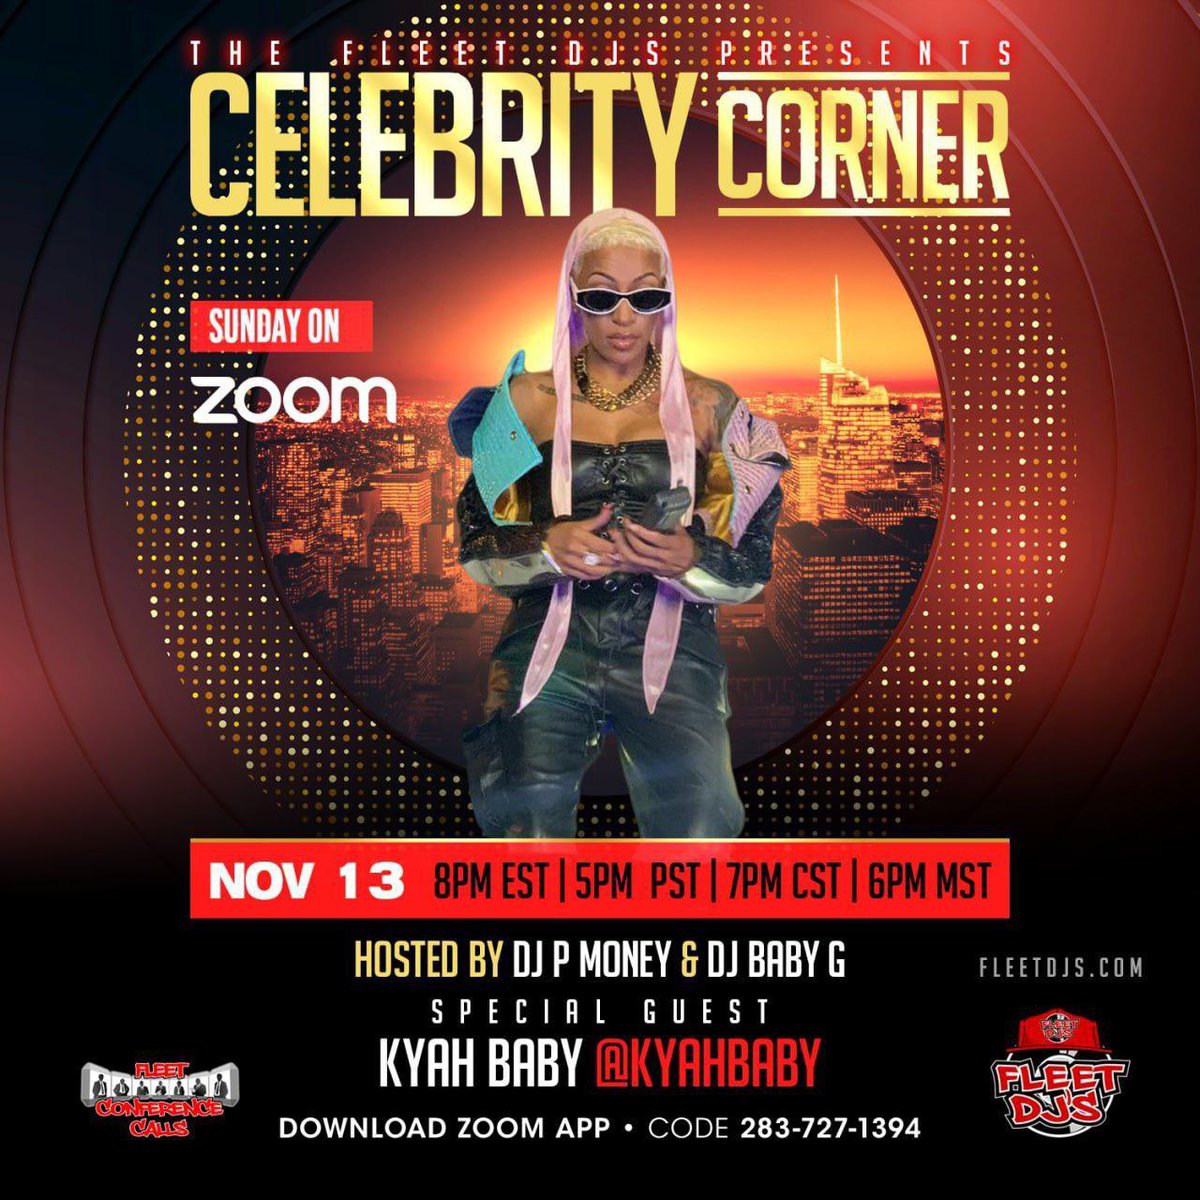 SUNDAY  it’s goin dooooown 🔥🔥🔥🔥 At 8pm est @FleetDjs Present Celebrity Corner Hosted by  @djpmoneynyc 🎤 &  @djbabyg70 with Special Guest @KYAHBABY Virtual Q&A on @Zoom 💻 If you have any questions you like to ask @Fleetdjs or 🎯 Email fleetconferencecall@gmail.com